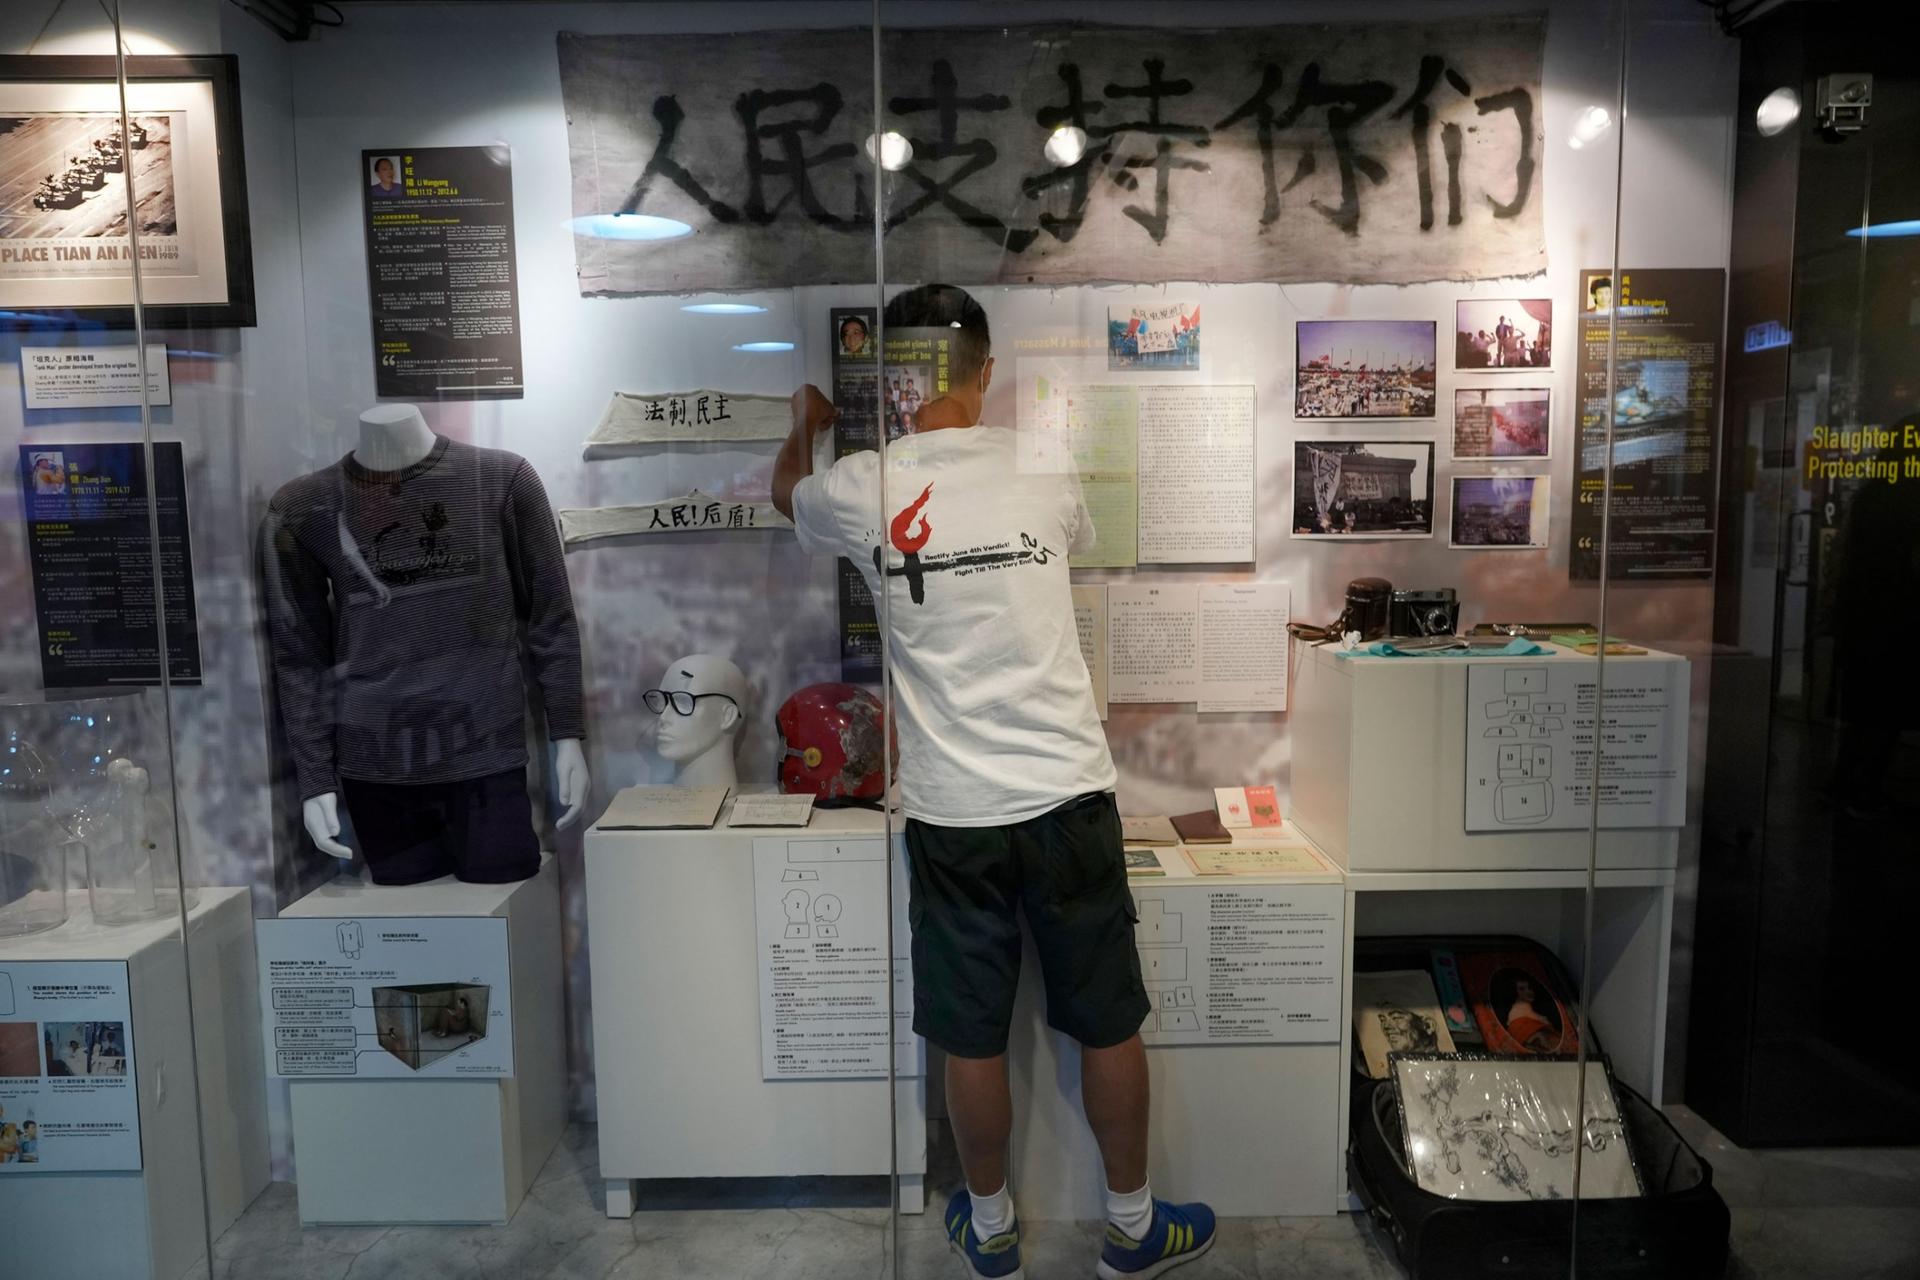 A man is shown wearing shorts and a t-shirt and standing in front of Tiananmen Square artifacts both hanging on the wall and on a mannequin. 